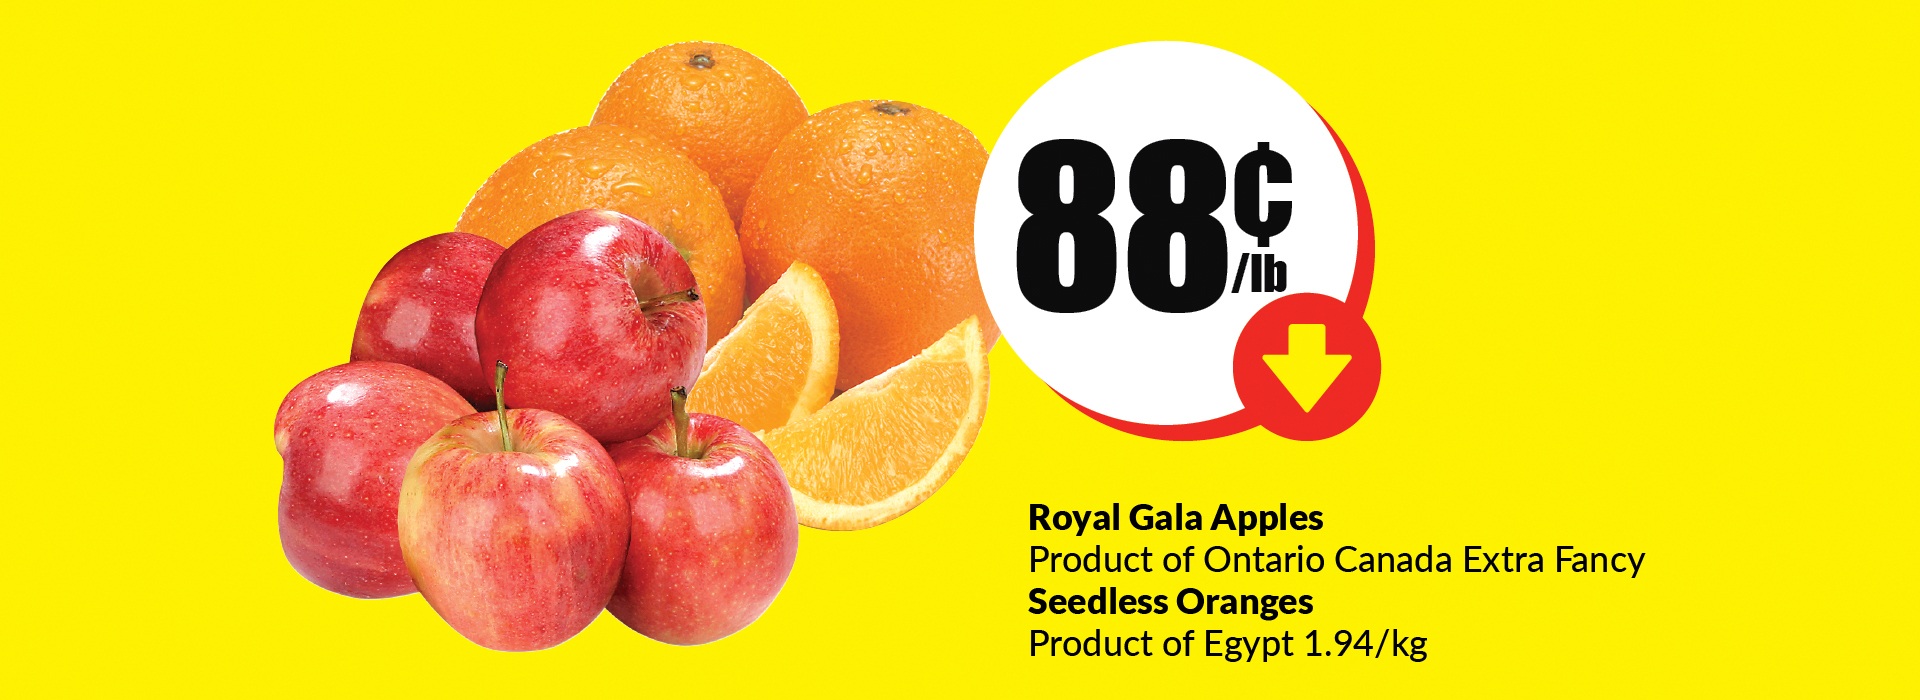 " The following image consists of the text, ""Royal Gala Apples Product of Ontario Canada Extra Fancy, Seedless Oranges, Product of Egypt 1.94/kg. Get them at $0.88/lb."" "